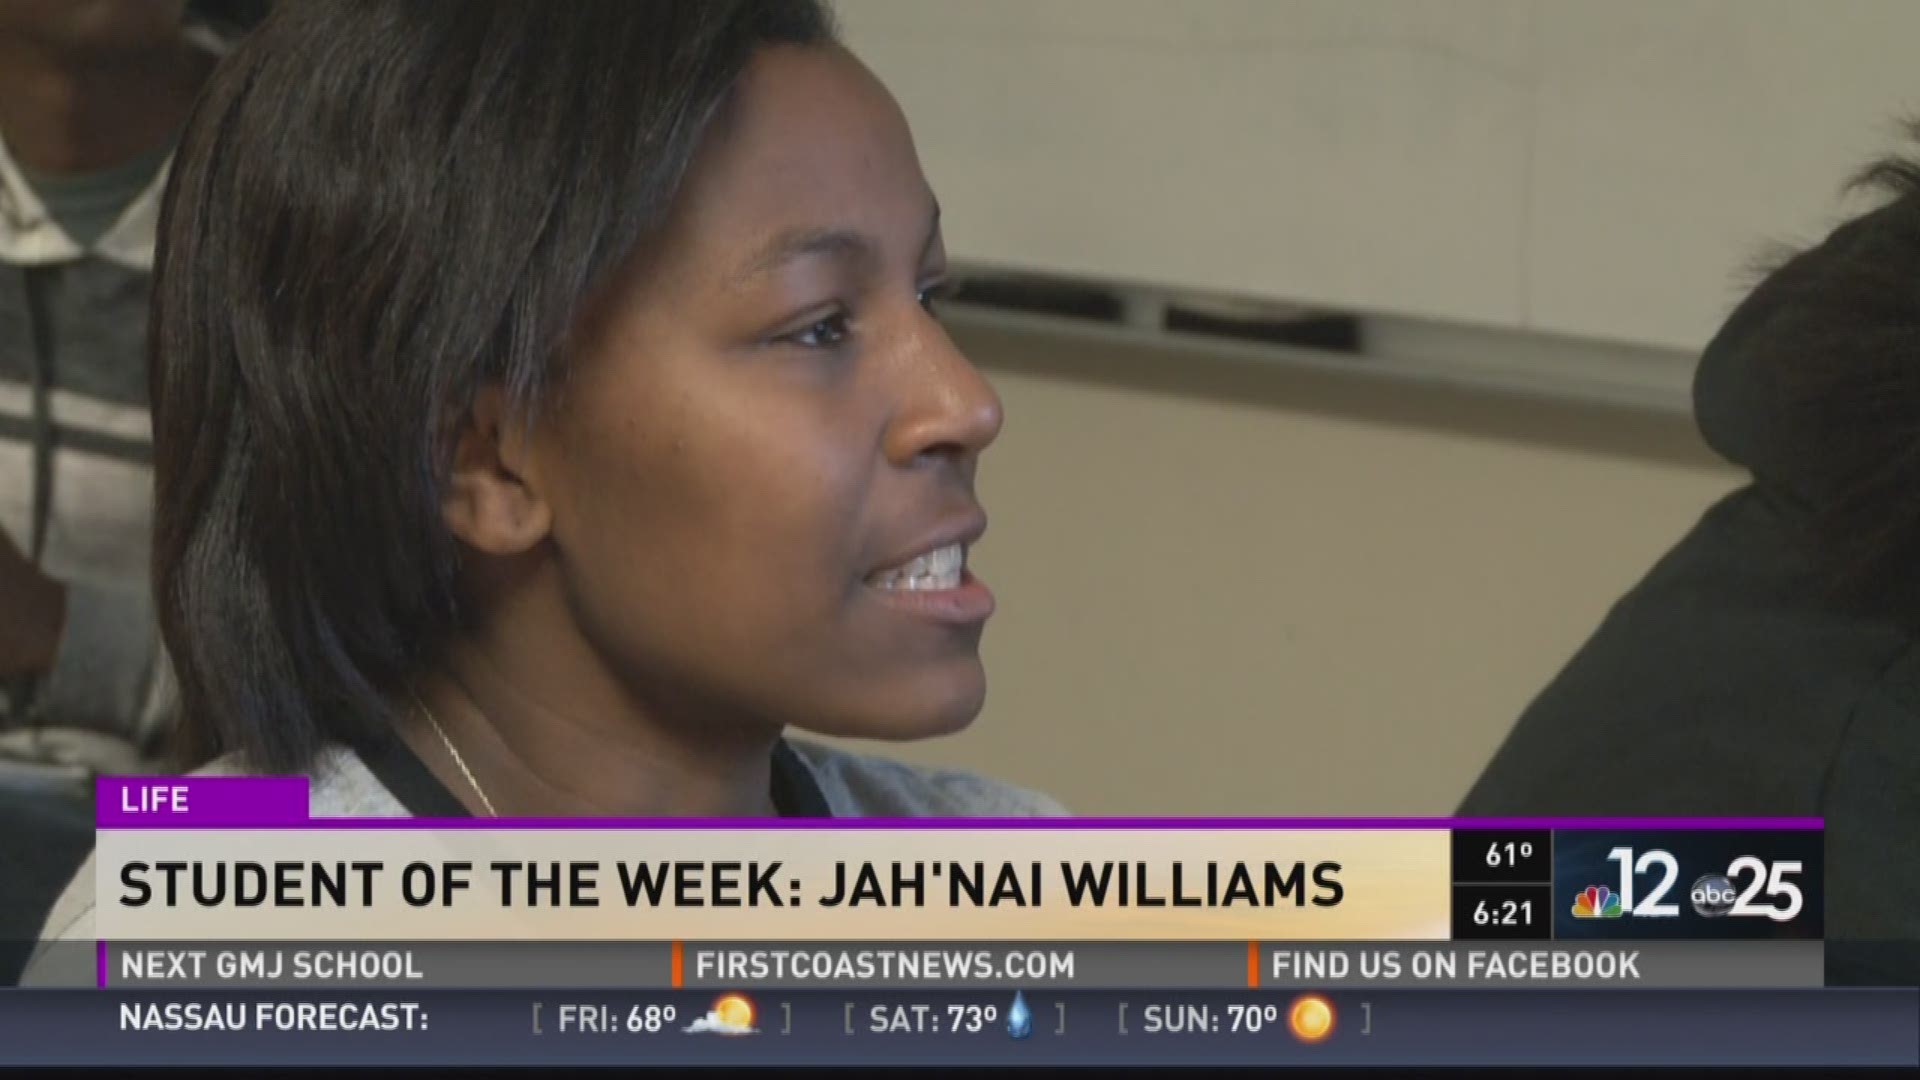 Jah'nai Williams is the student of the week.